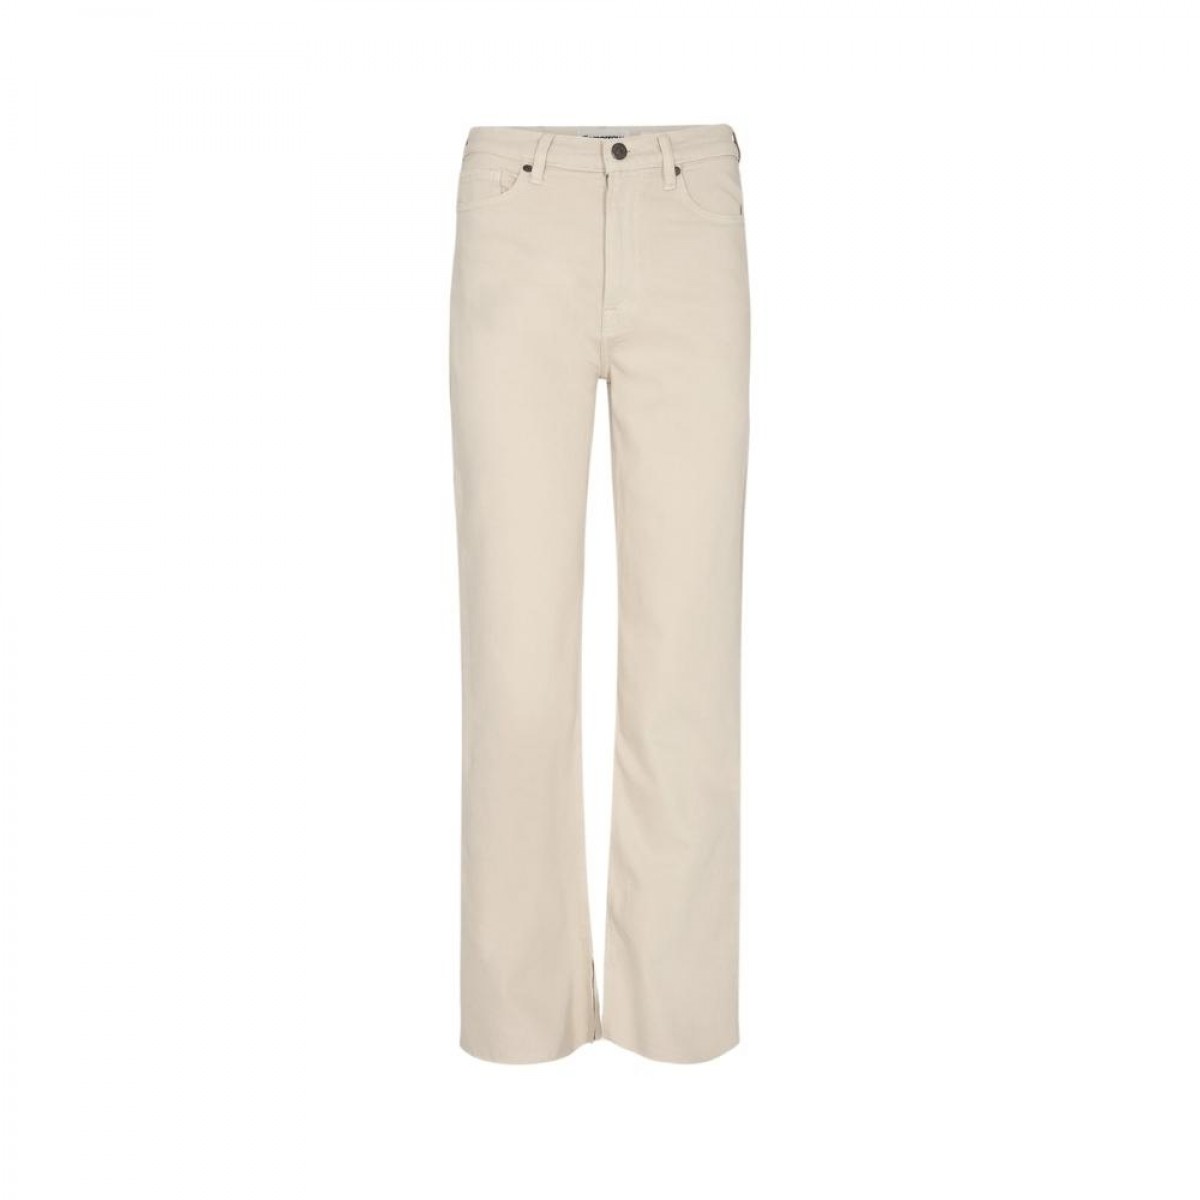 brown jeans wash caffe crema - cafe creme - front 